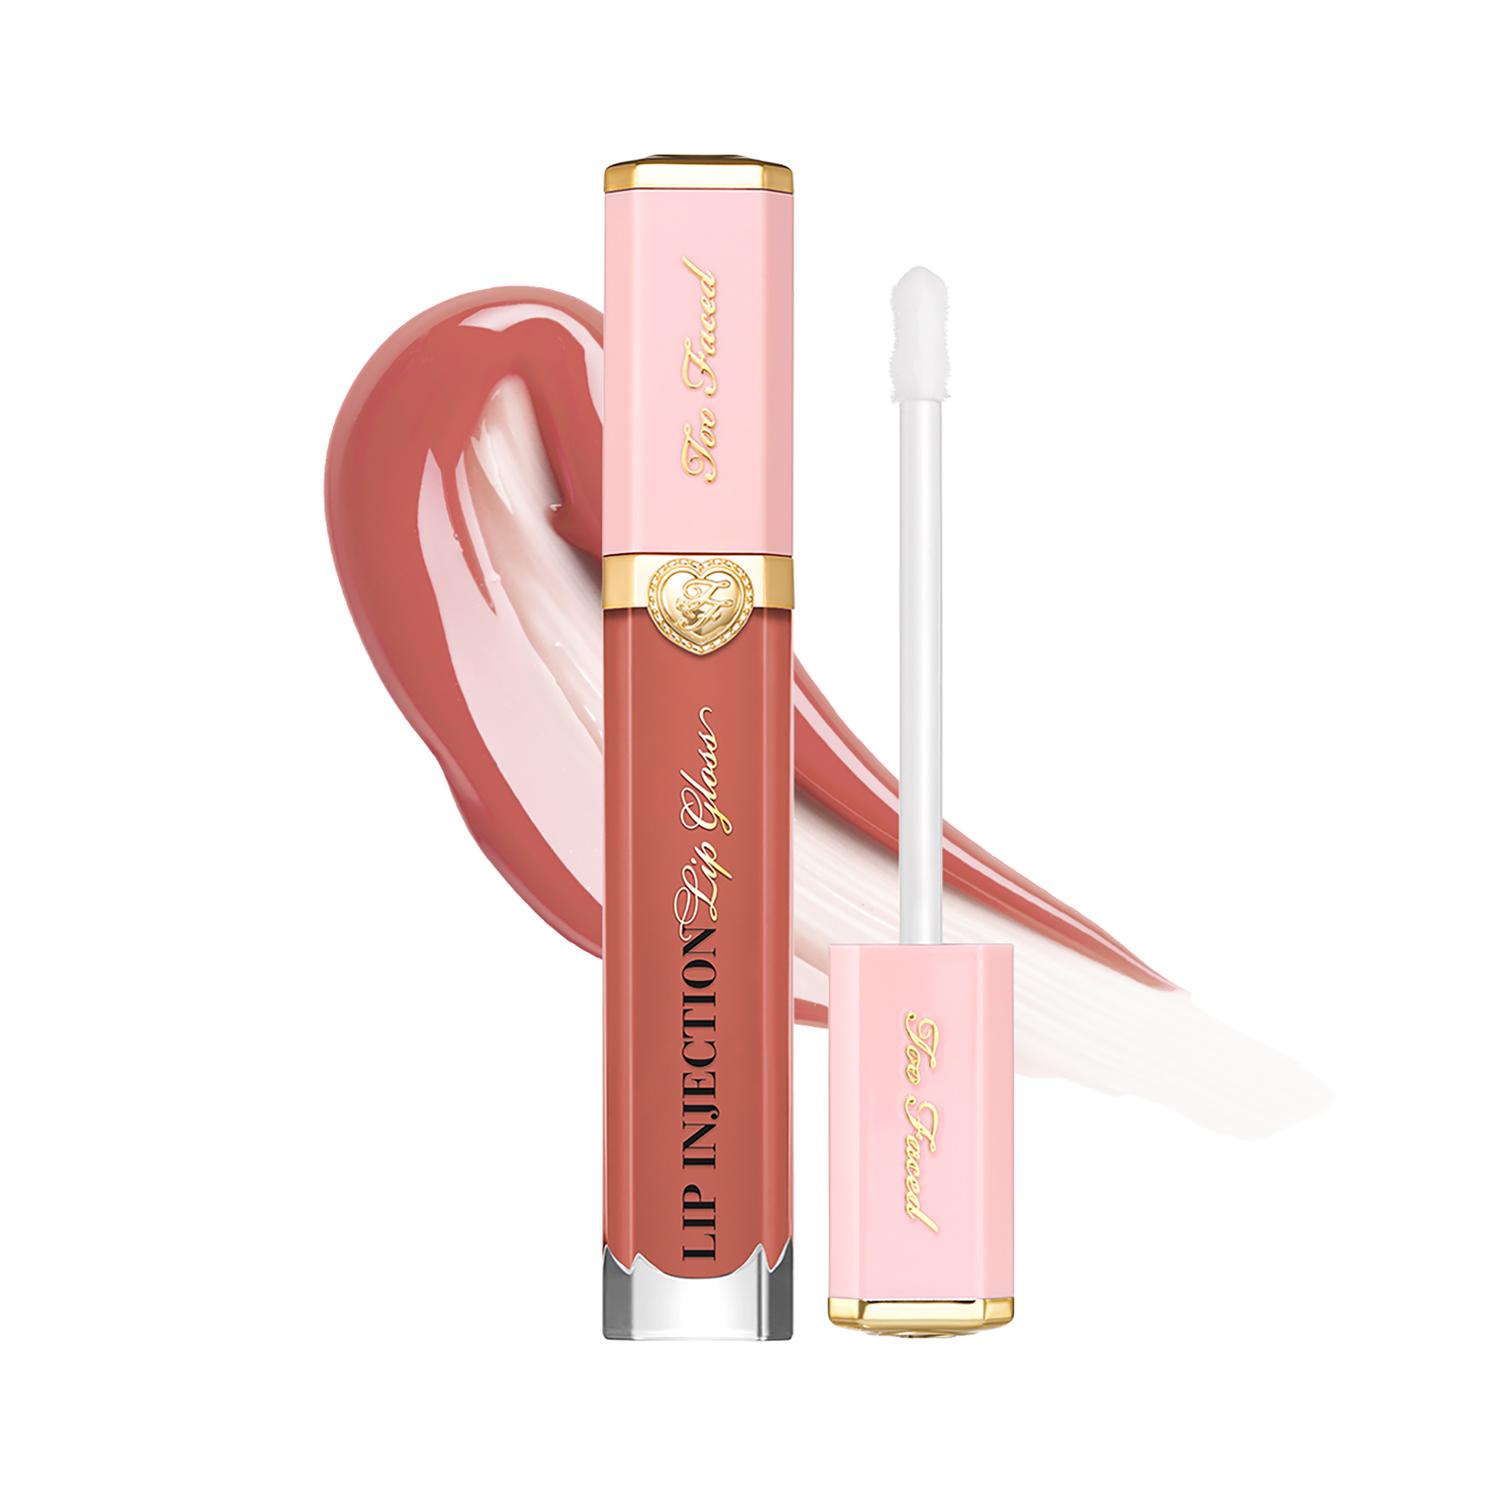 Too Faced | Too Faced Lip Injection Power Plumping Lip Gloss - Secure The Bag (7ml)